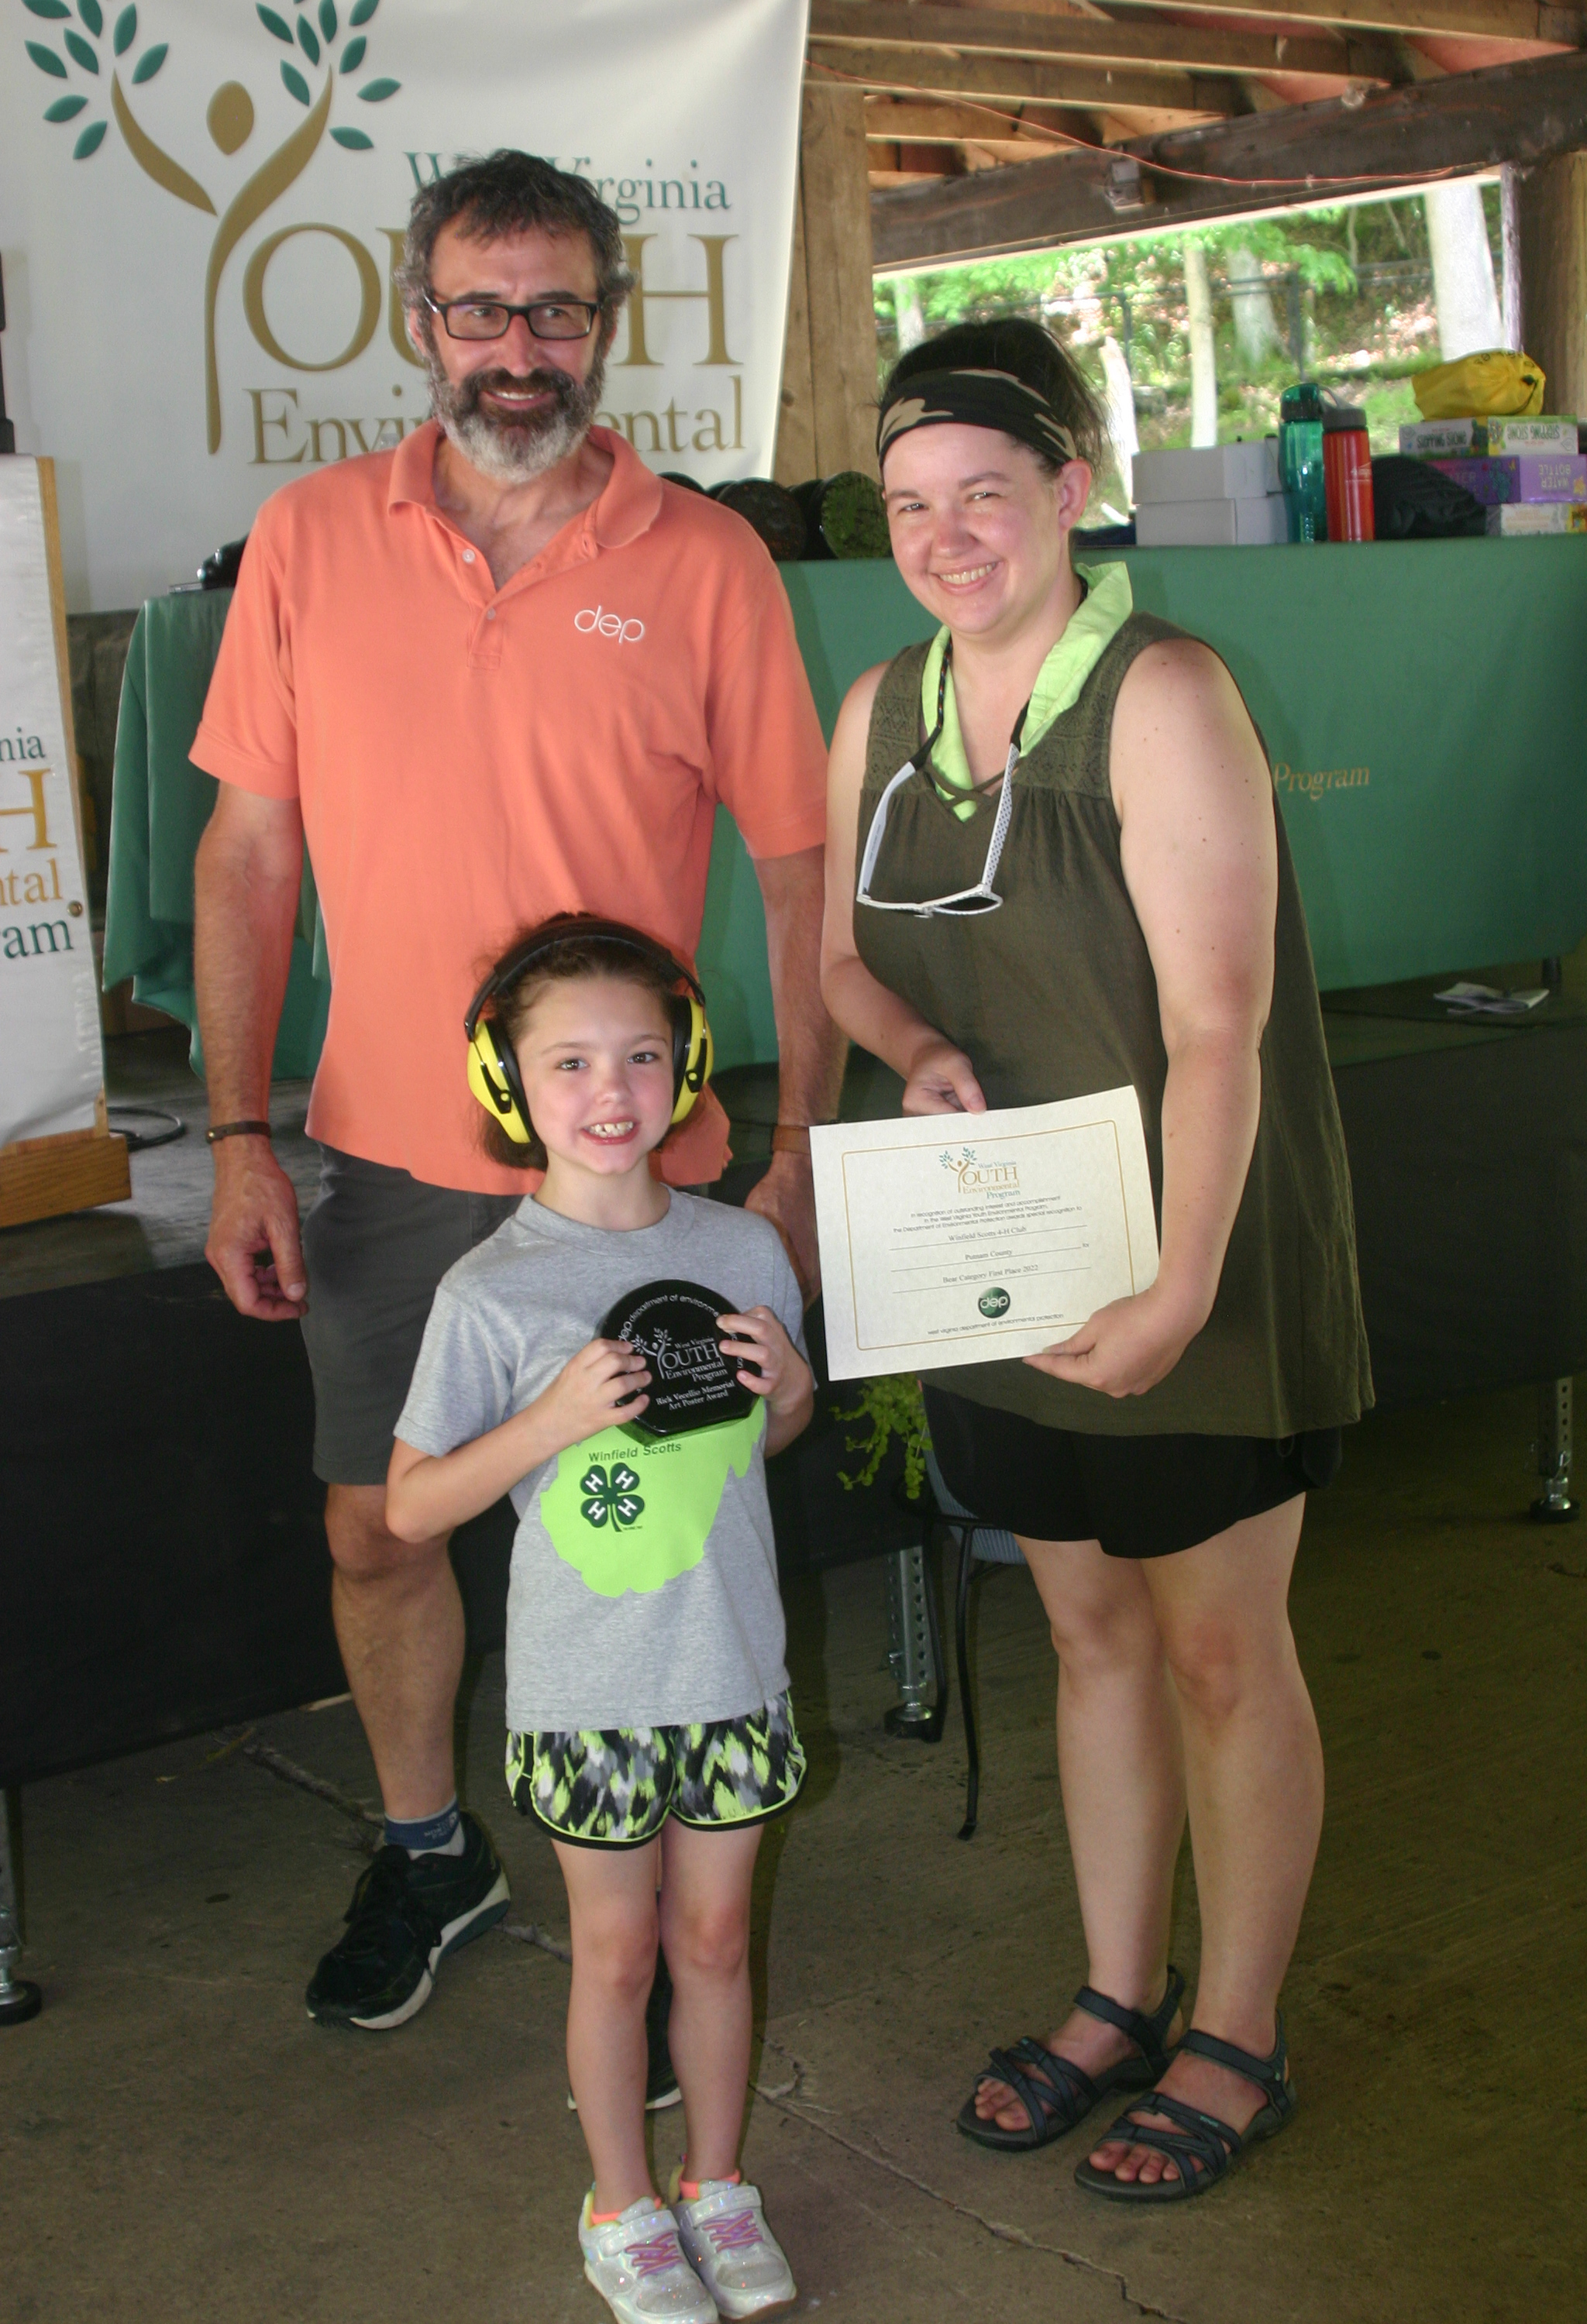 Winfield Scotts 4-H Club, Putnam County, winners of the Bear Awards Environmental Projects